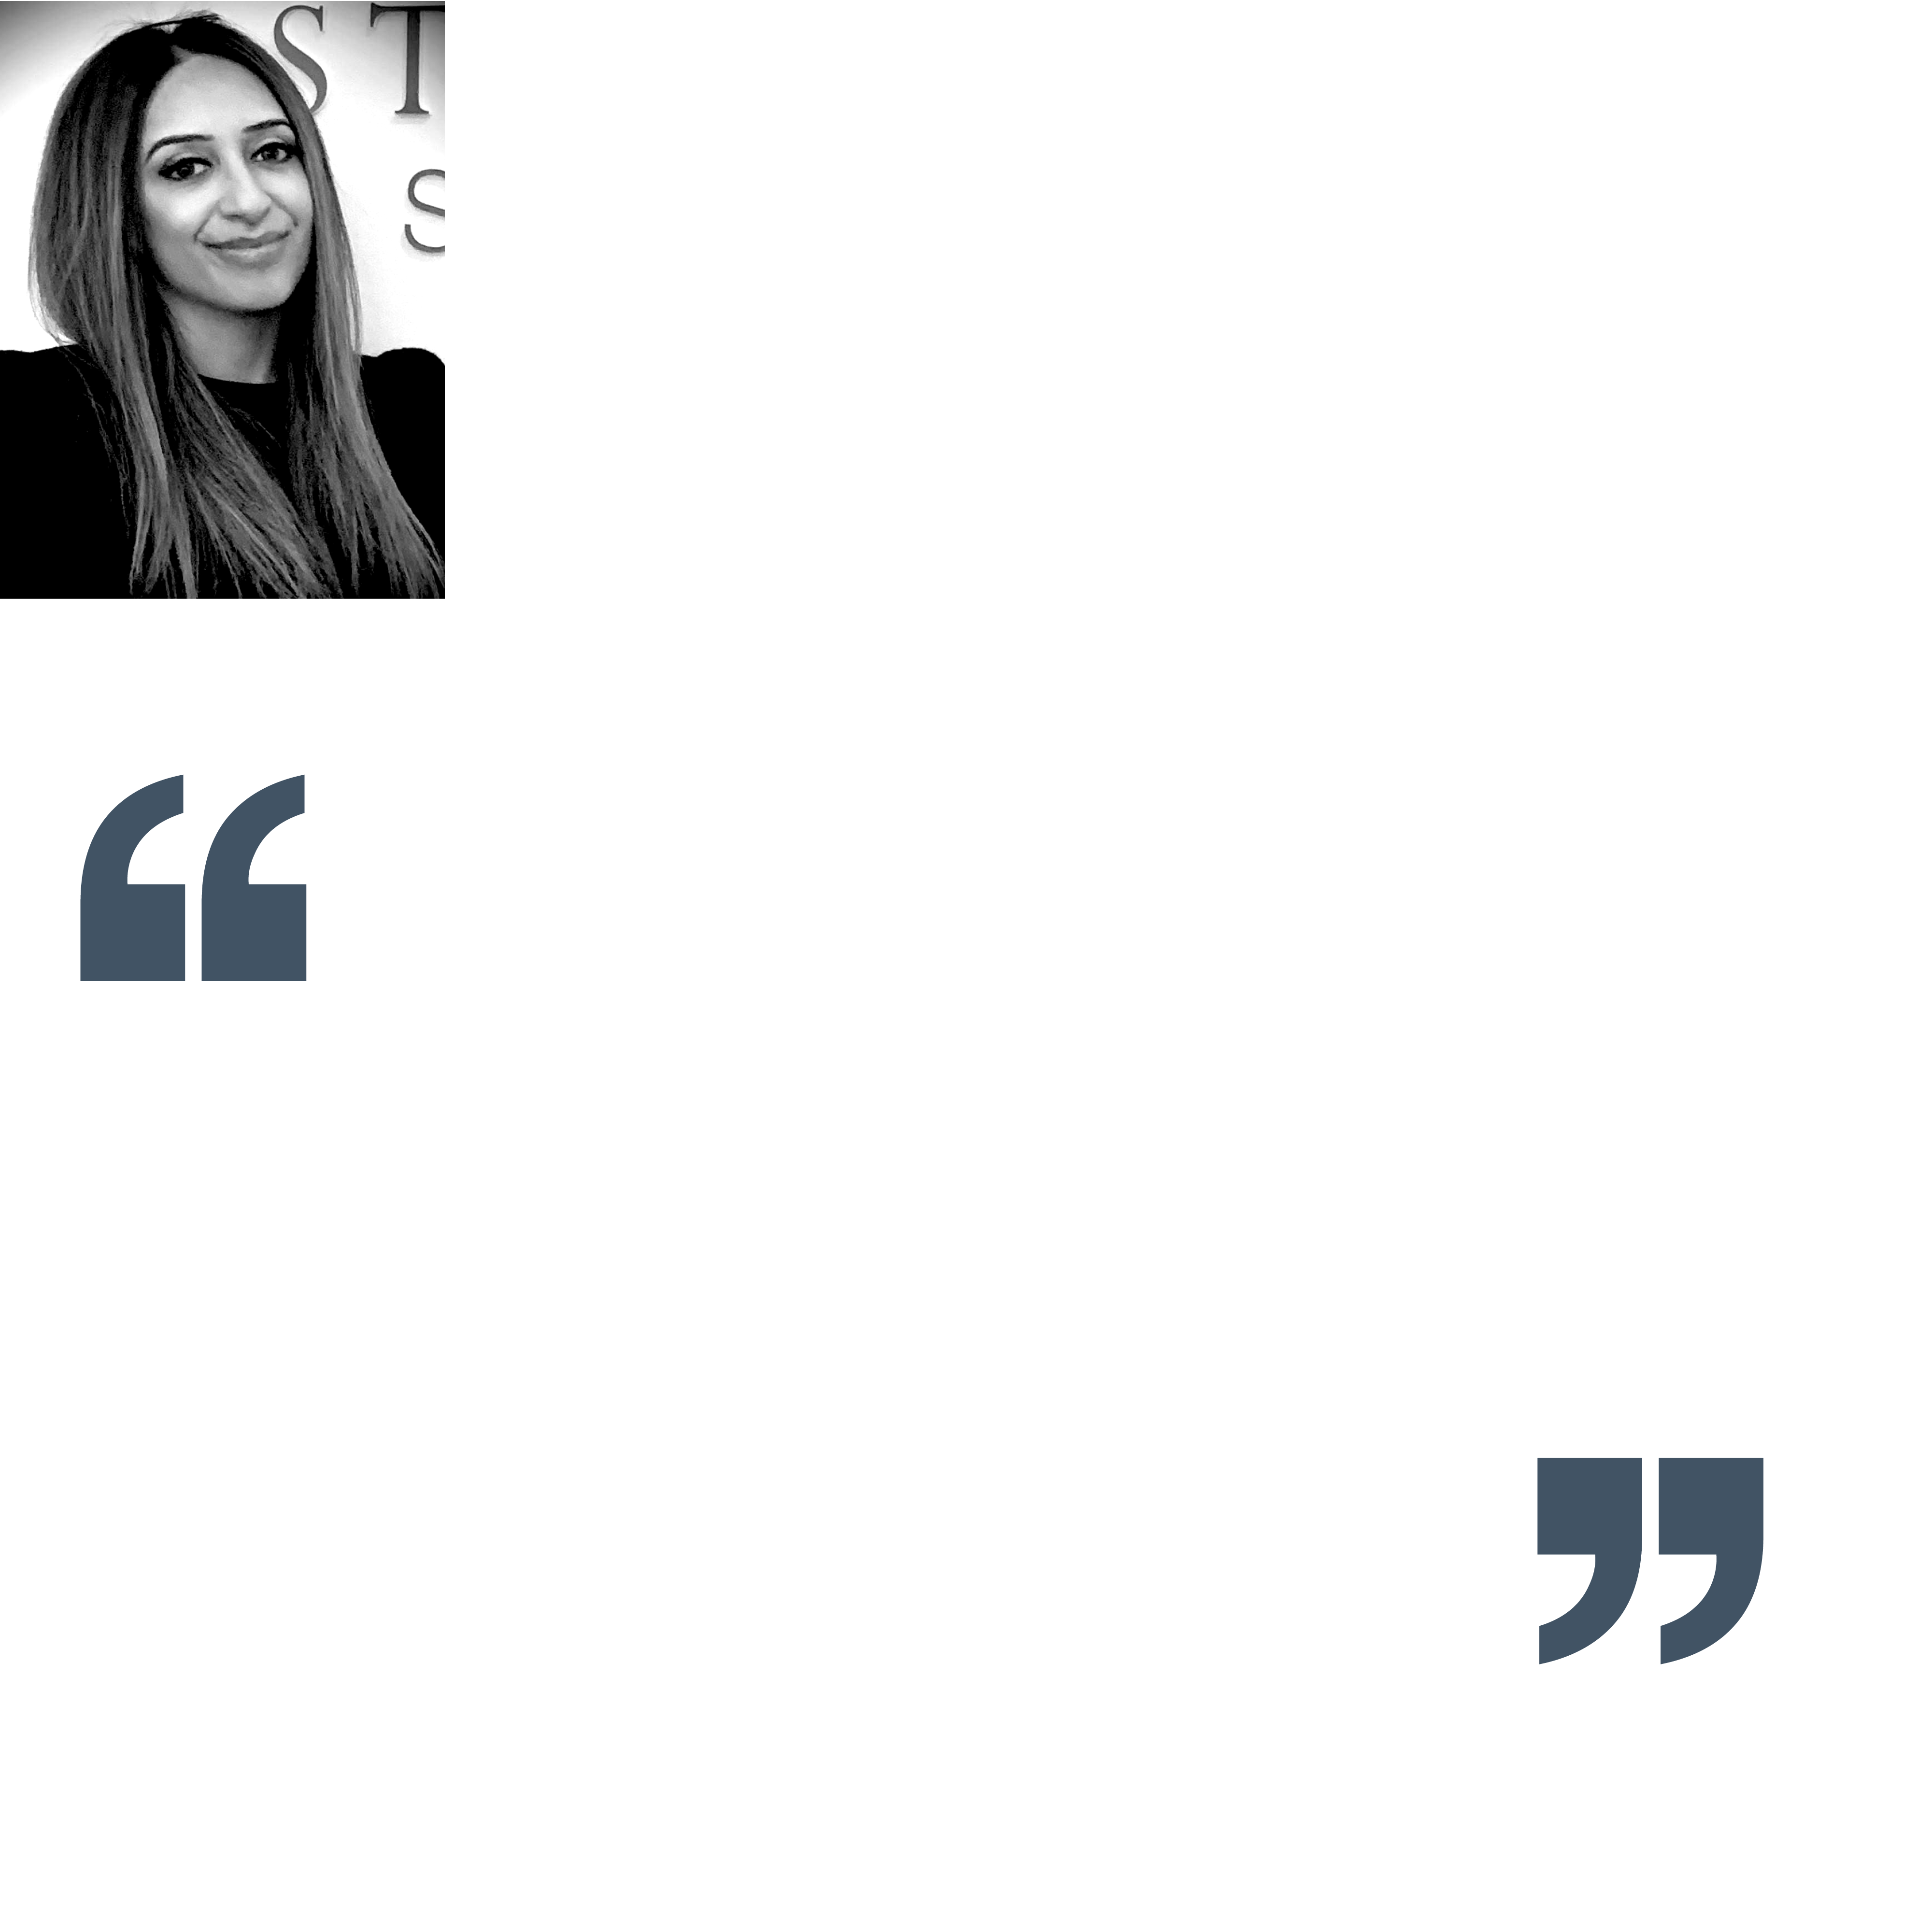 Quote from Pam Sanghera, Director, Charles Strachan Solicitors. “The opportunity to work and study law at the same time was very important to me, as it allowed me to obtain practical work experience to hit the ground running. The CILEX route has enabled me to specialise early and be recognised as an award-winning international family lawyer.